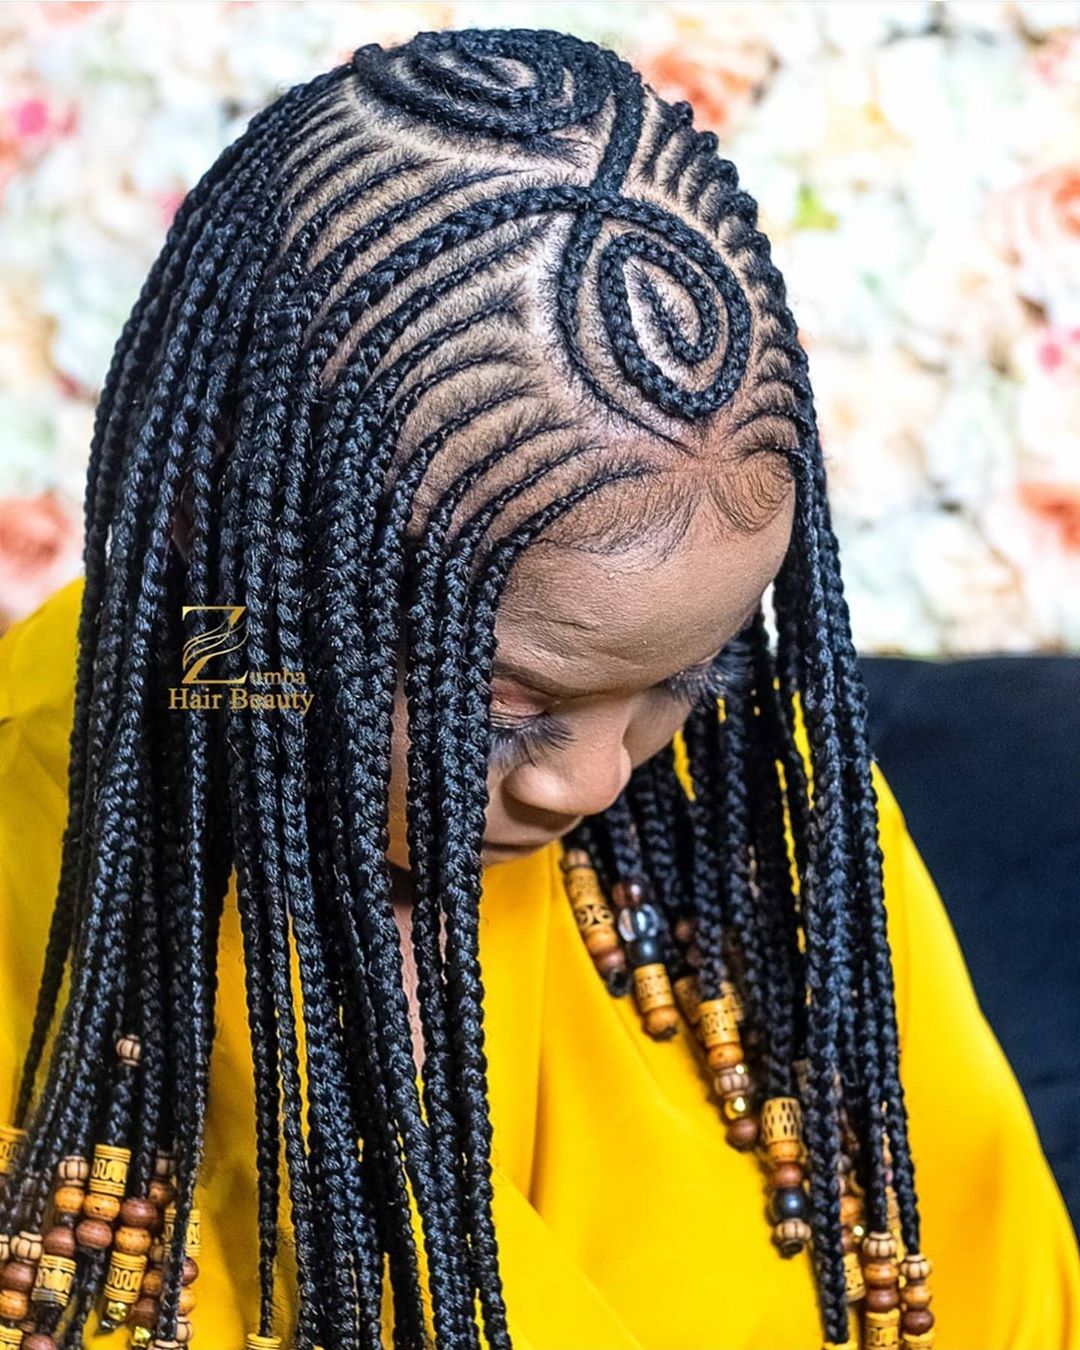 Latest Braided Hairstyles 2020: Top 10 Best Braided Hairstyles | Styles ...